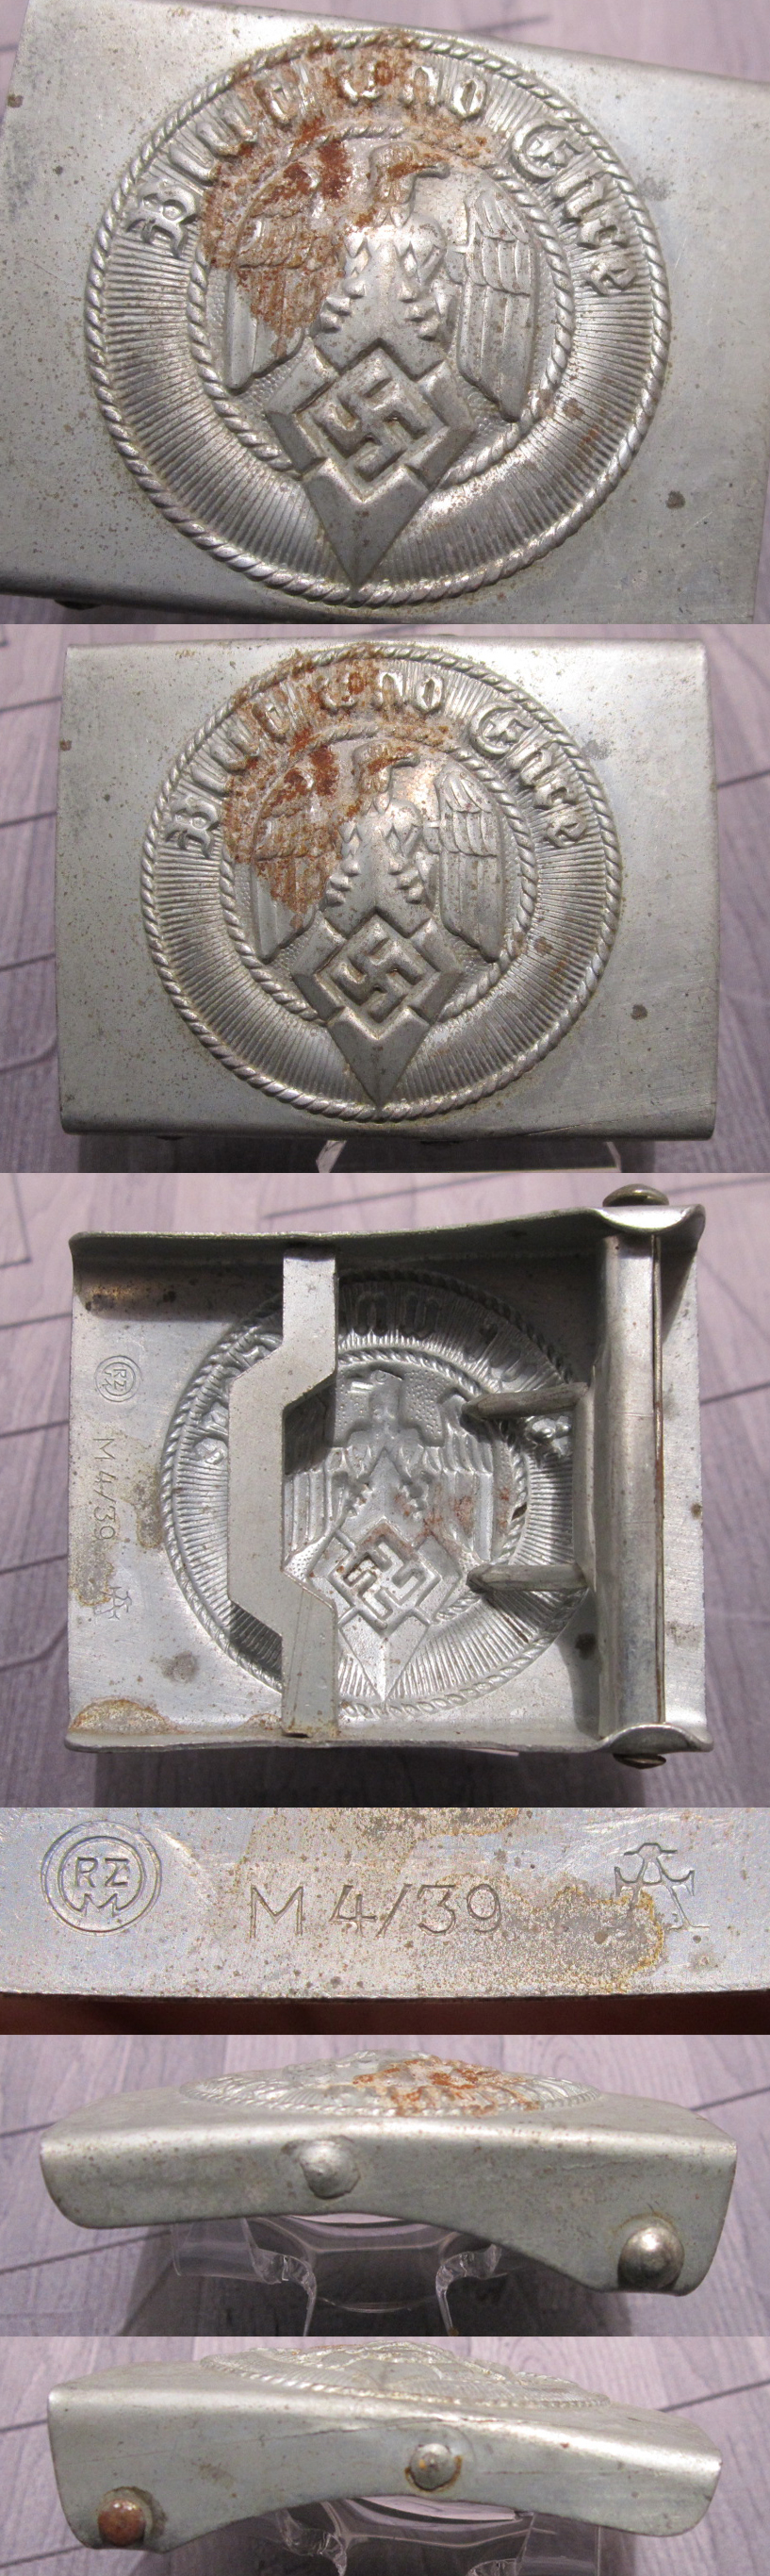 Hitler Youth Belt Buckle with Crank Catch